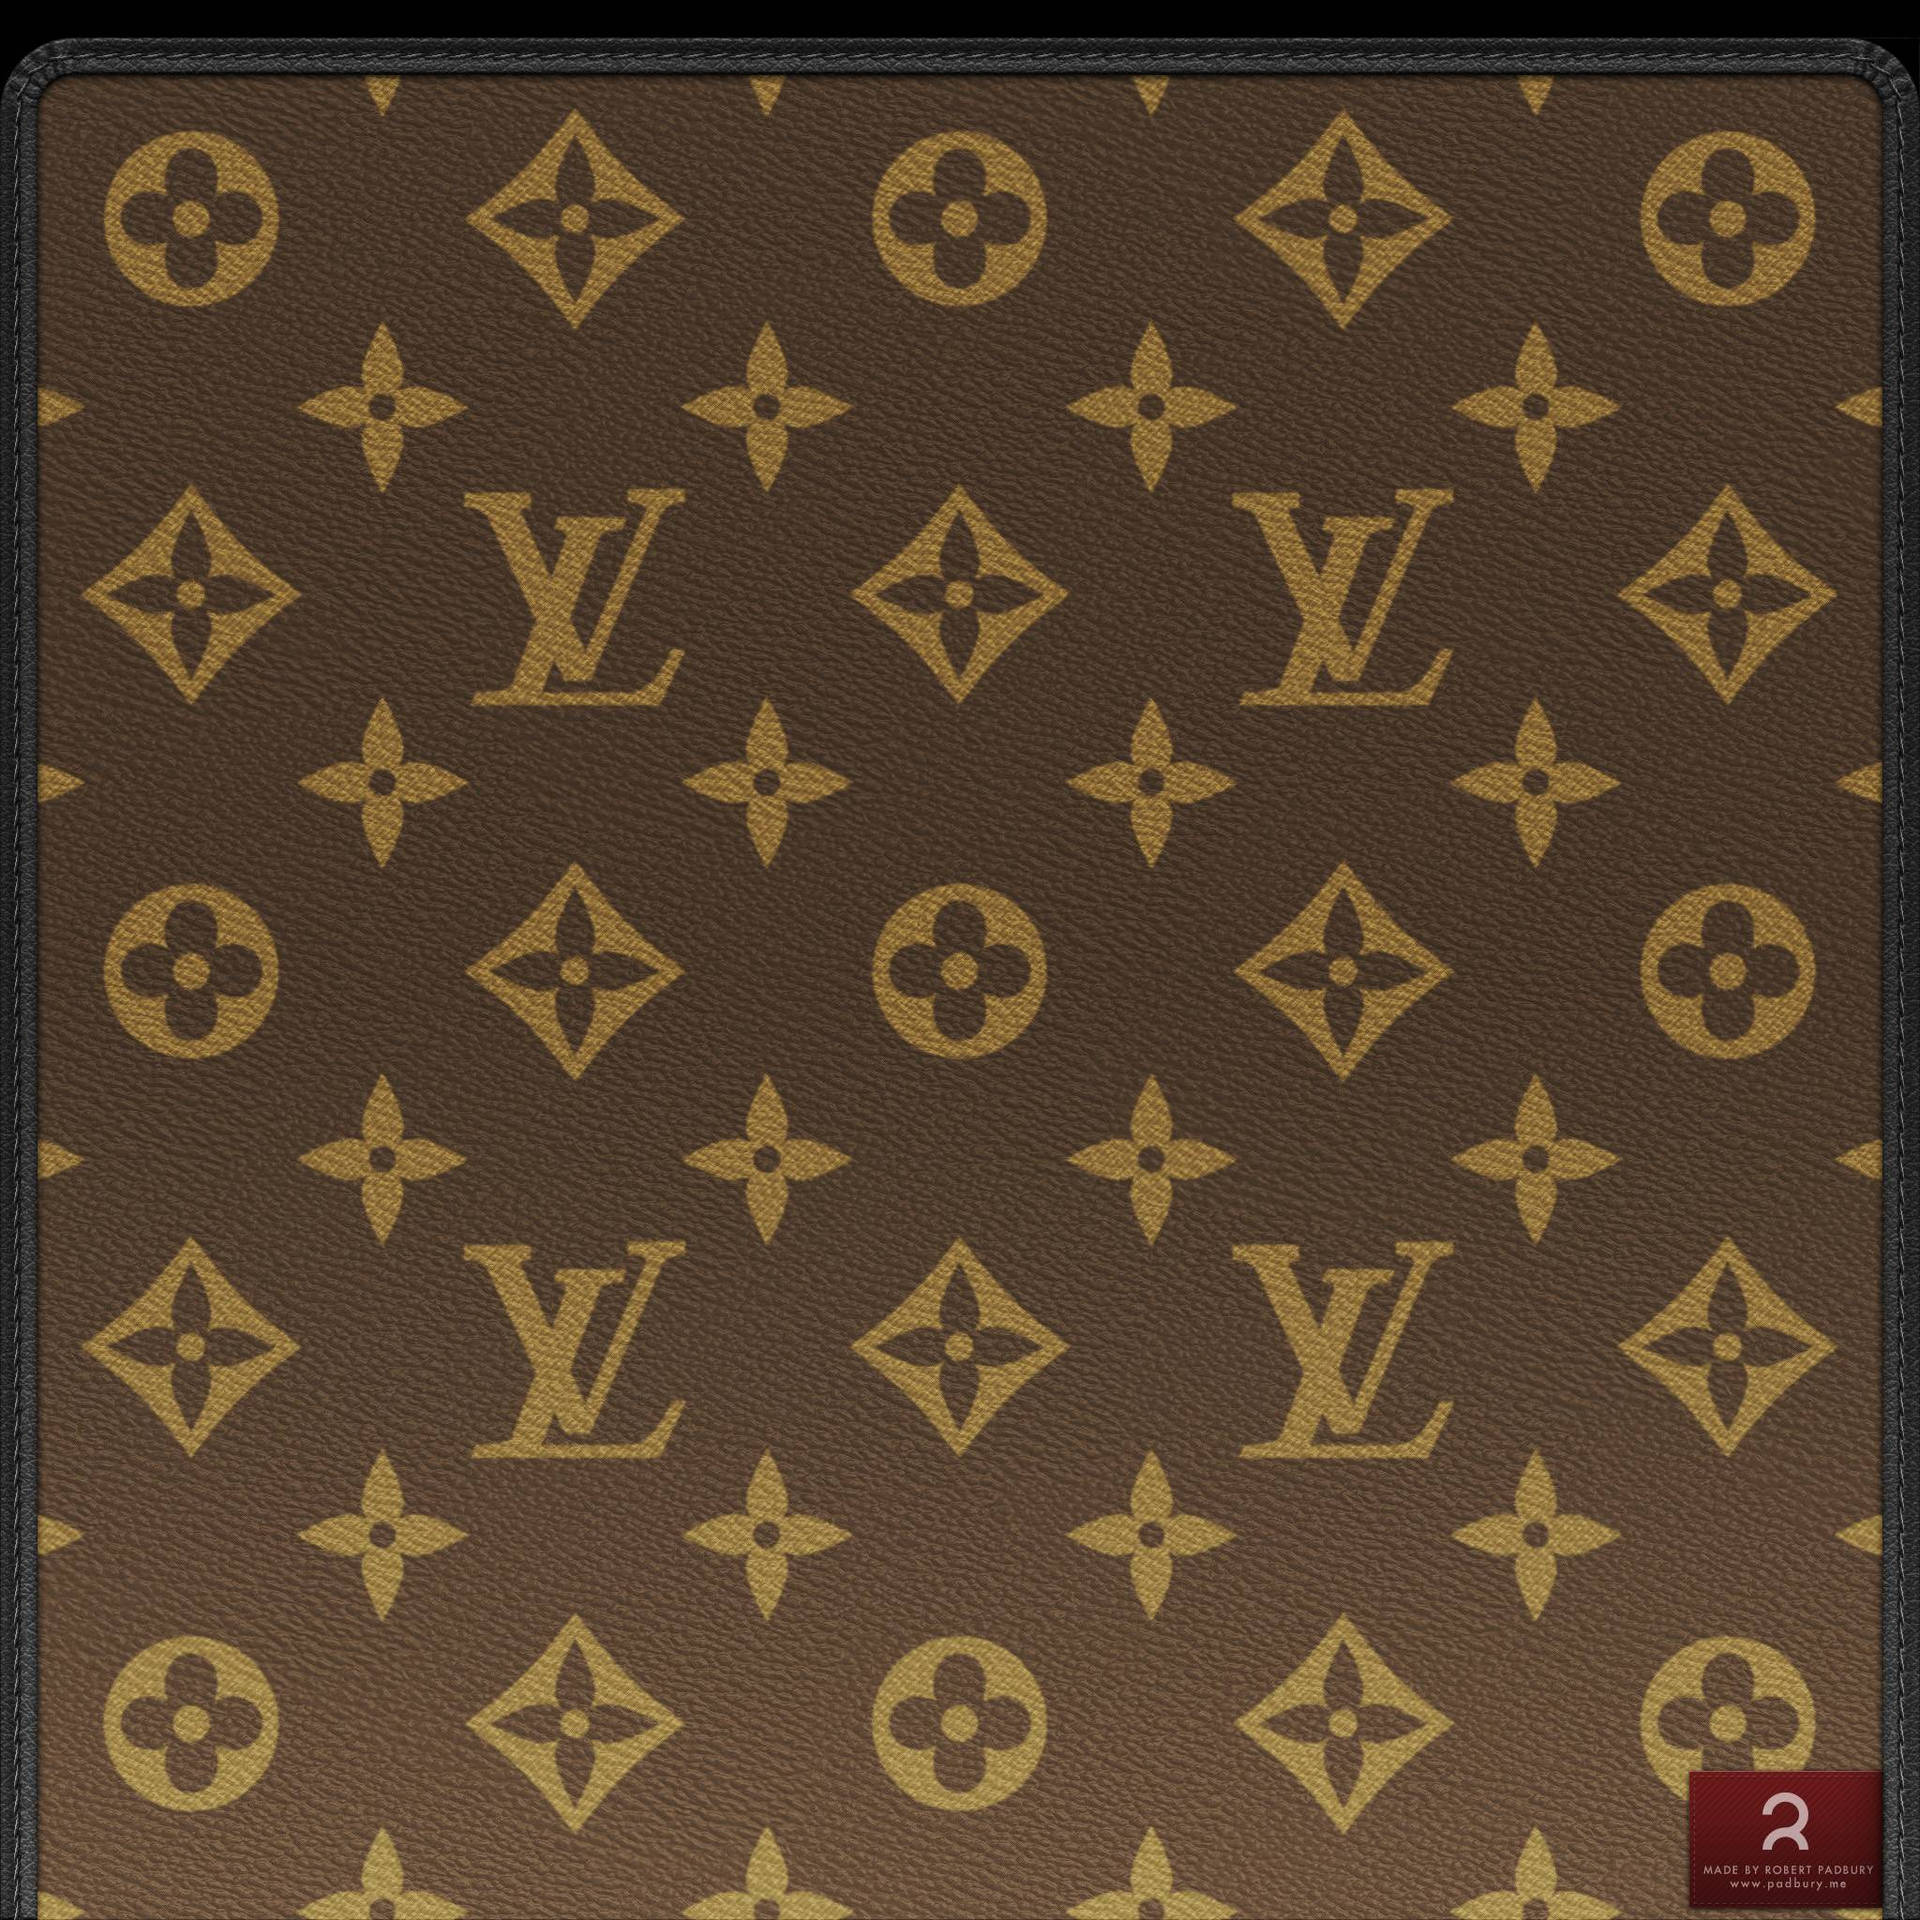 Louis Vuitton 2048X2048 Wallpaper and Background Image